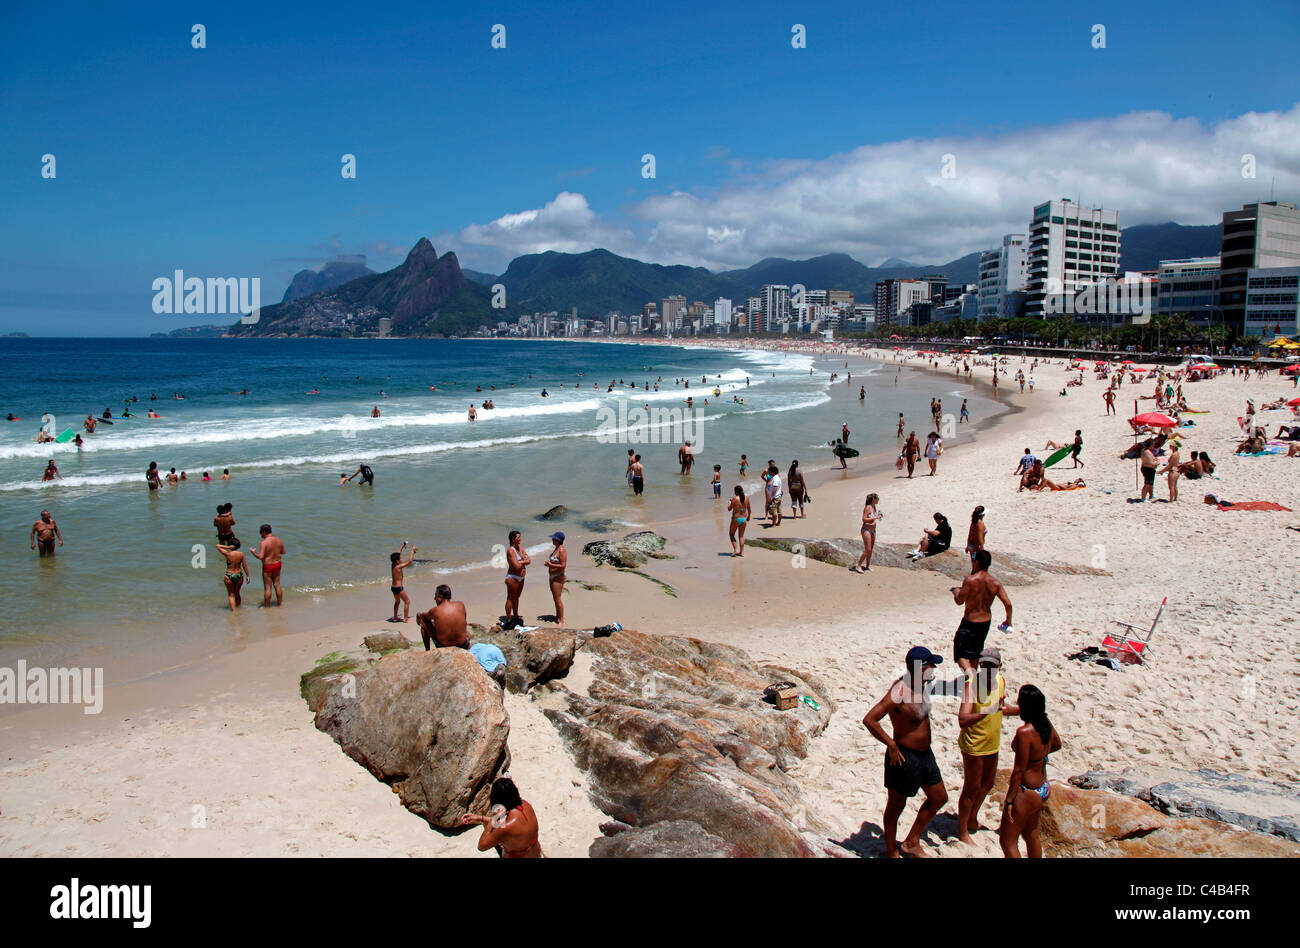 The famous Ipanema Beach in Rio de Janeiro with the Two Brothers Mountain in the background. Brazil Stock Photo